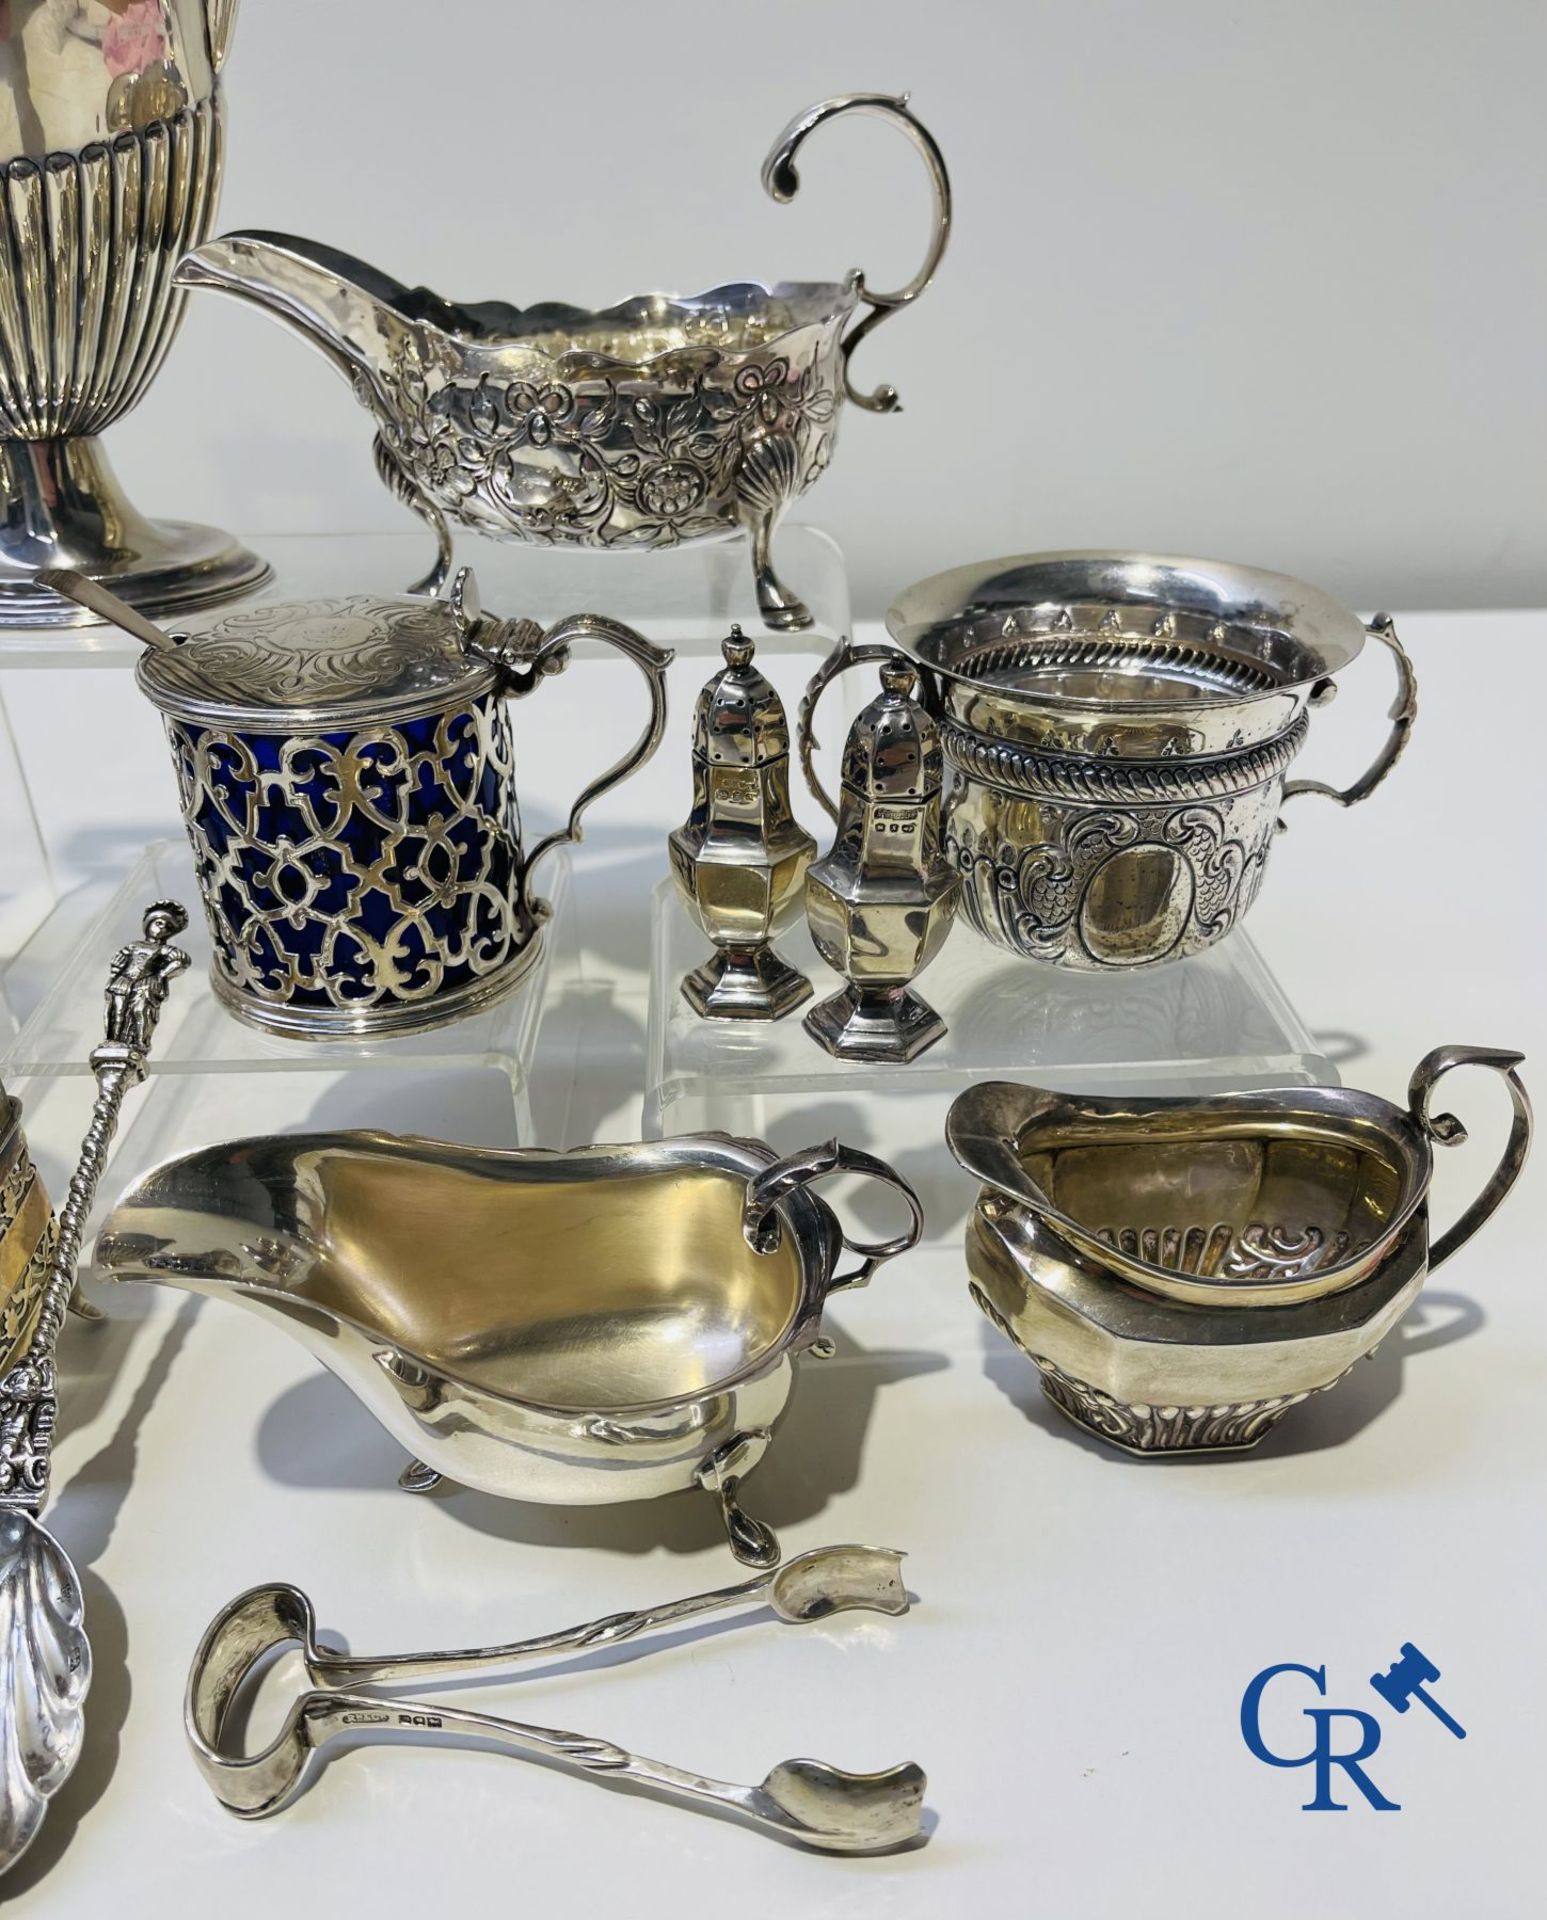 Silver: Important lot with various pieces of English silver. (various hallmarks) 19th-20th century. - Image 5 of 19